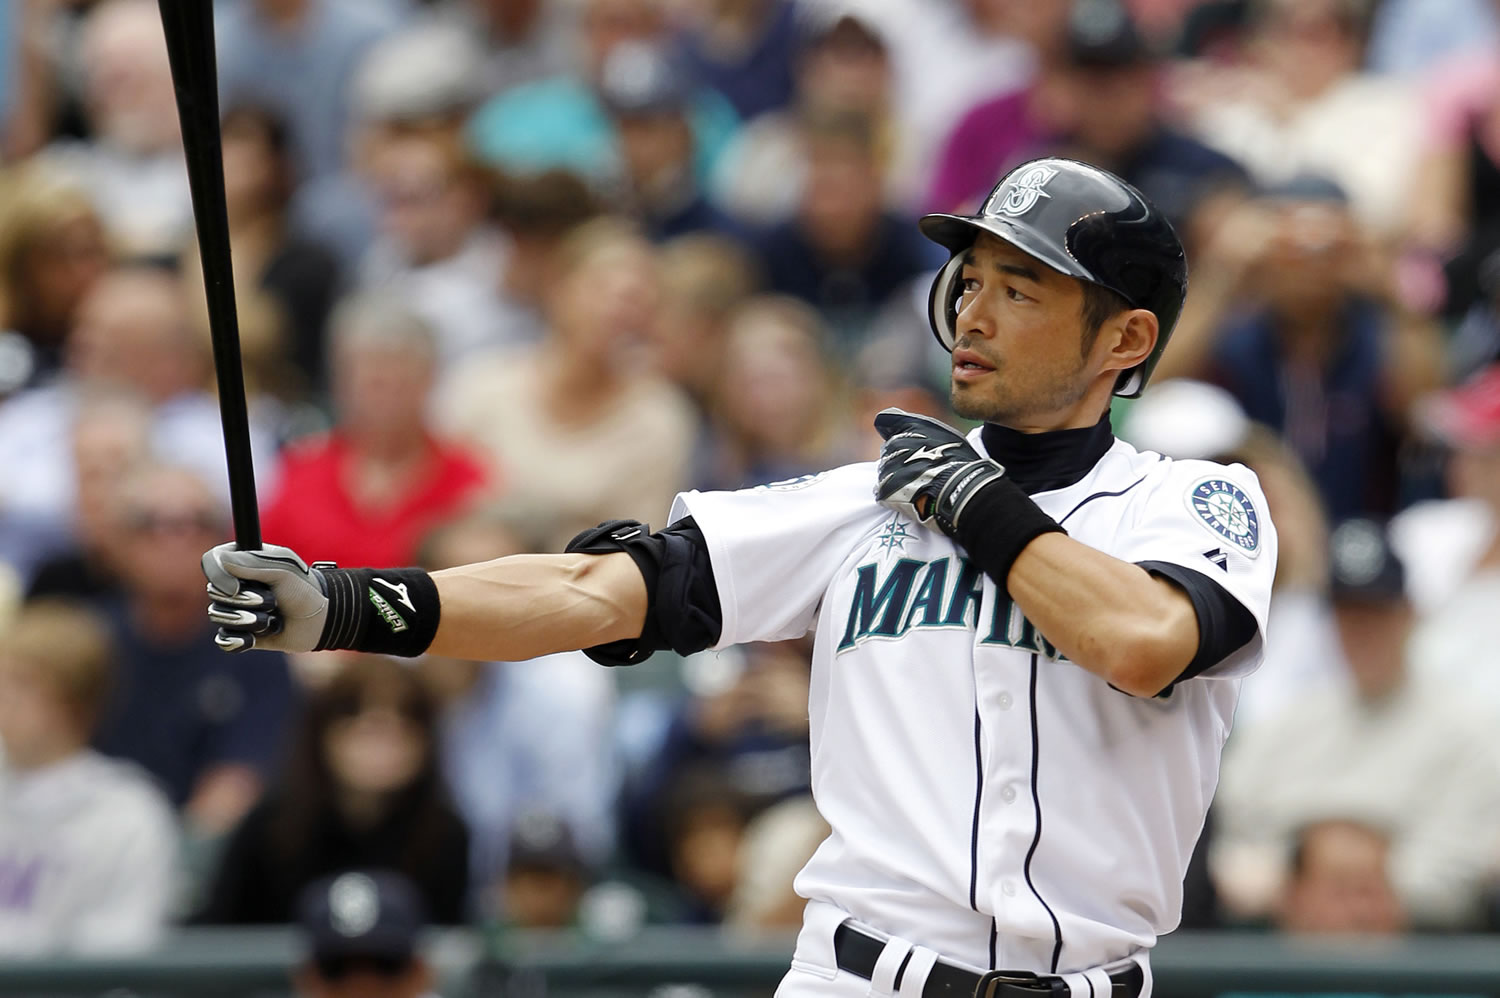 Seattle Mariners all-star outfielder Ichiro Suzuki was traded Monday to the New York Yankees for two minor-league prospects and cash considerations.